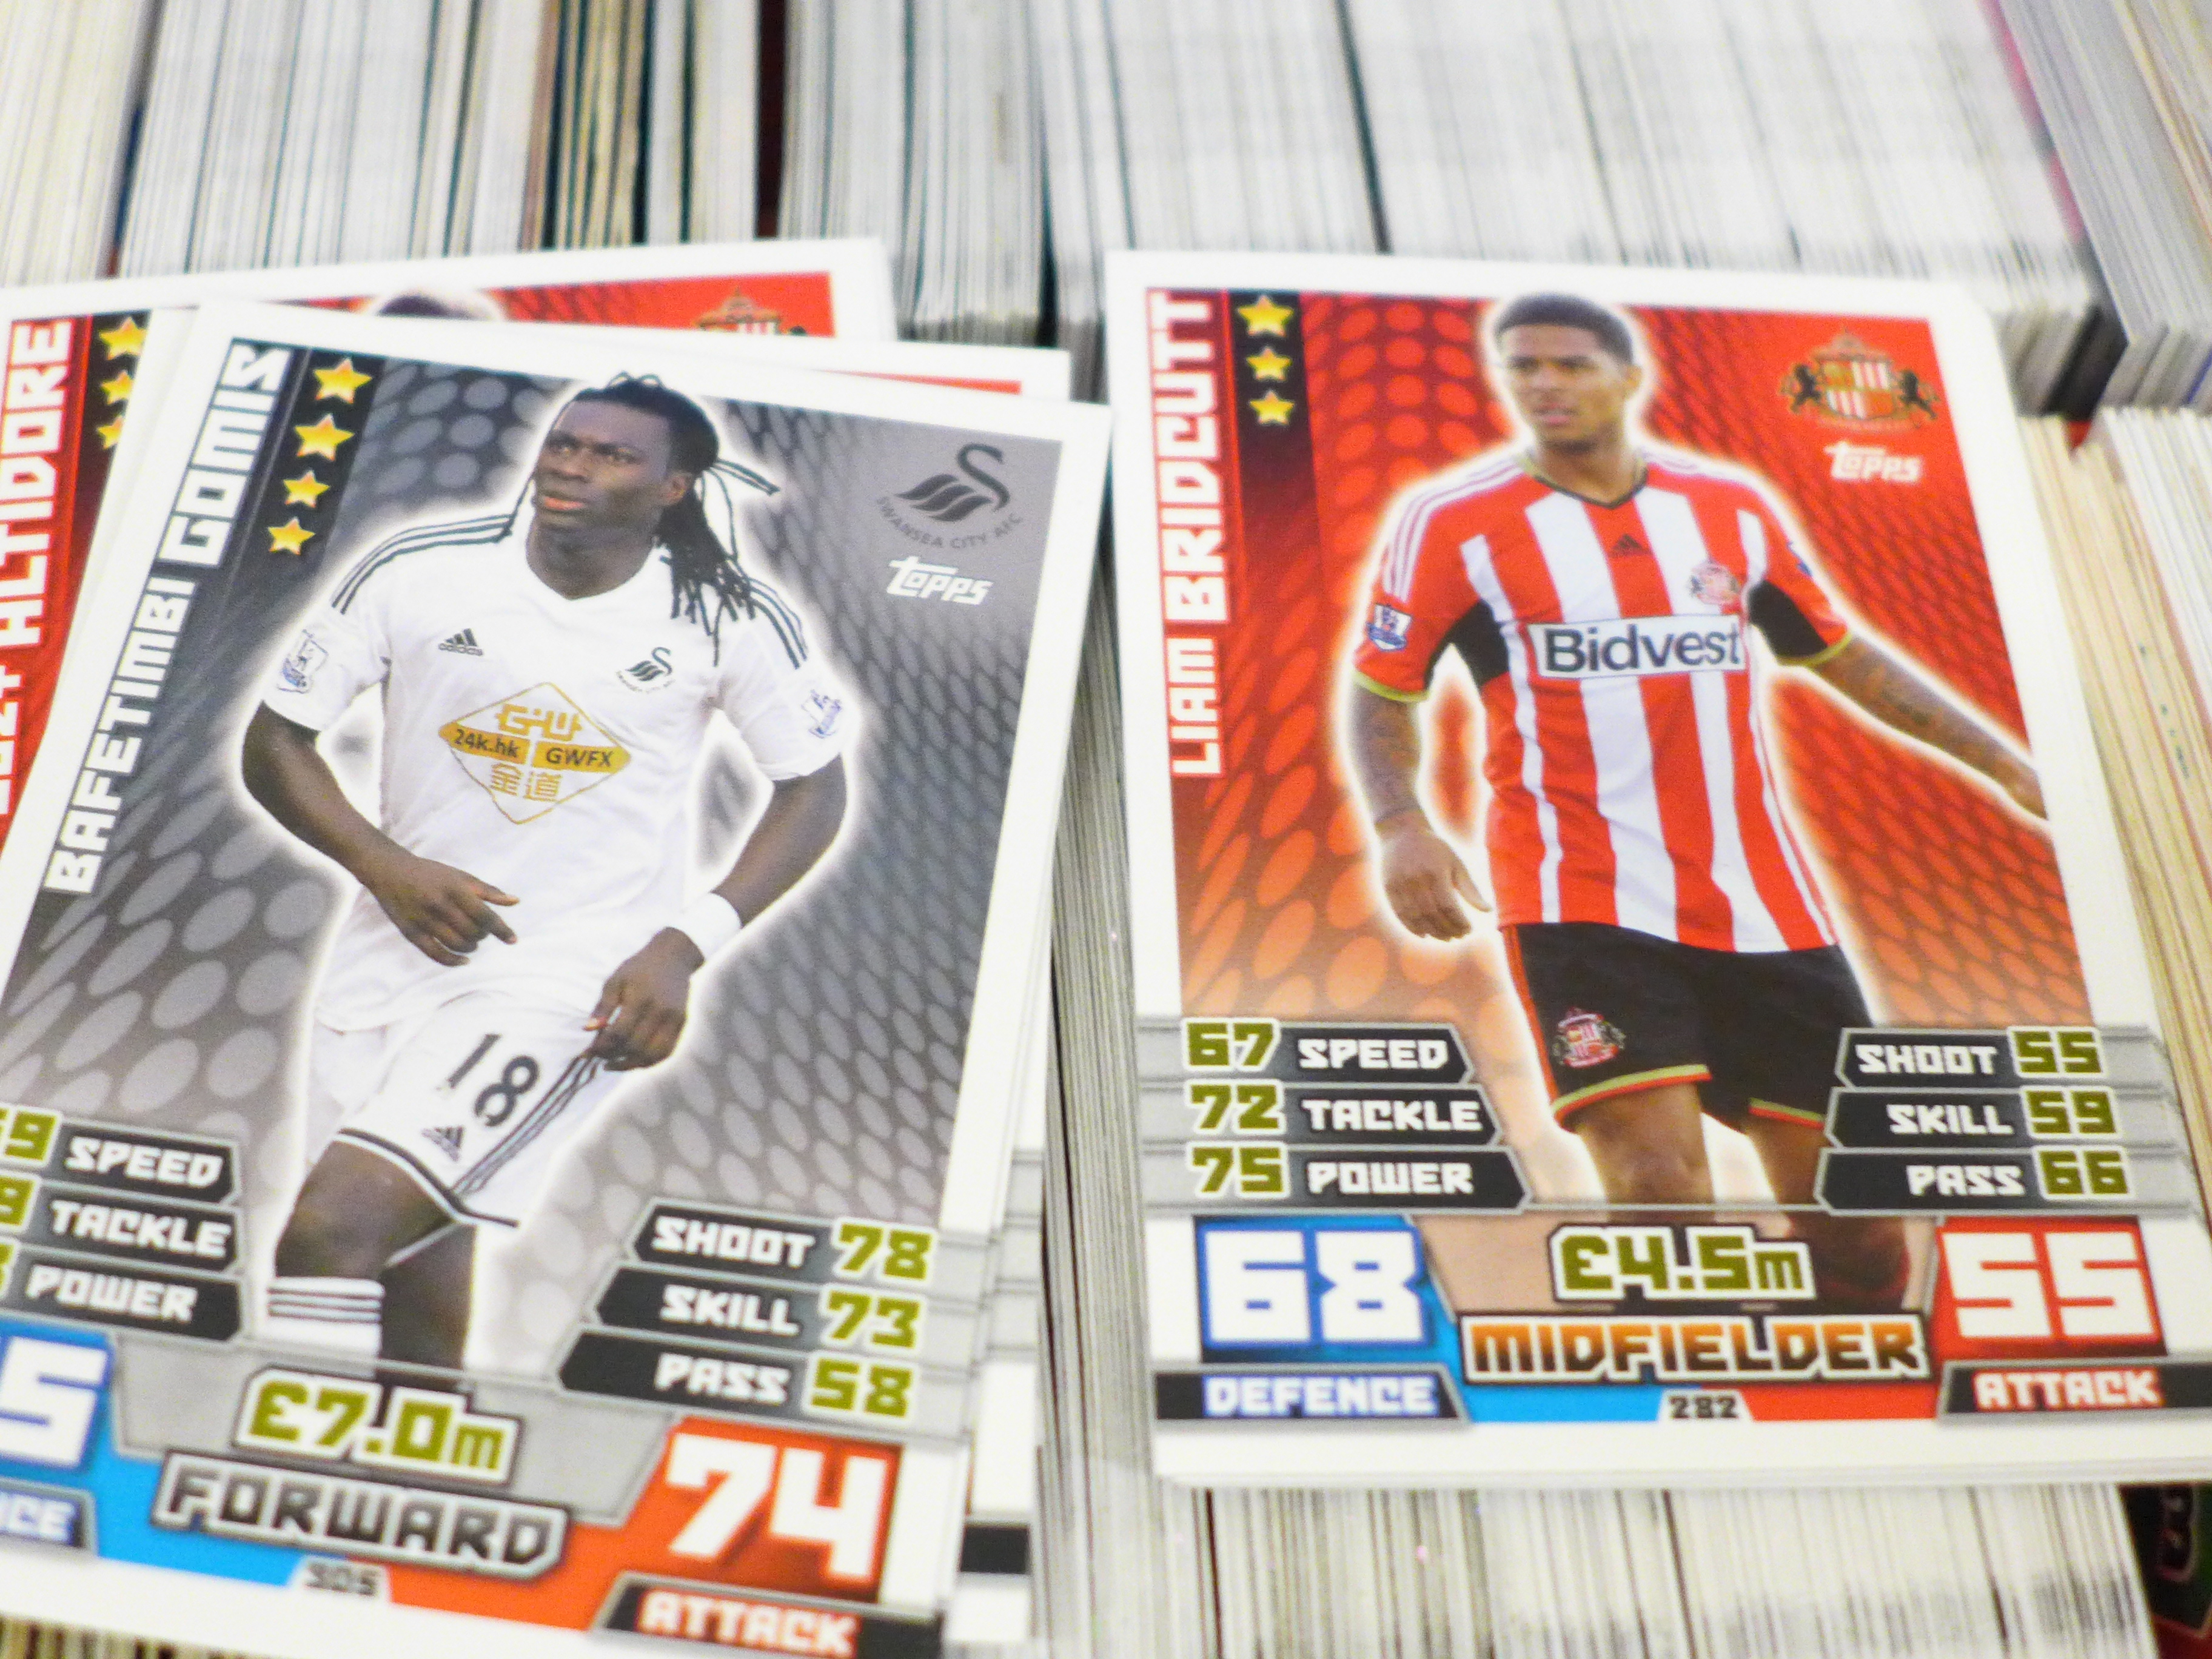 Approximately 500 Match Attax collectors cards in case - Image 4 of 5